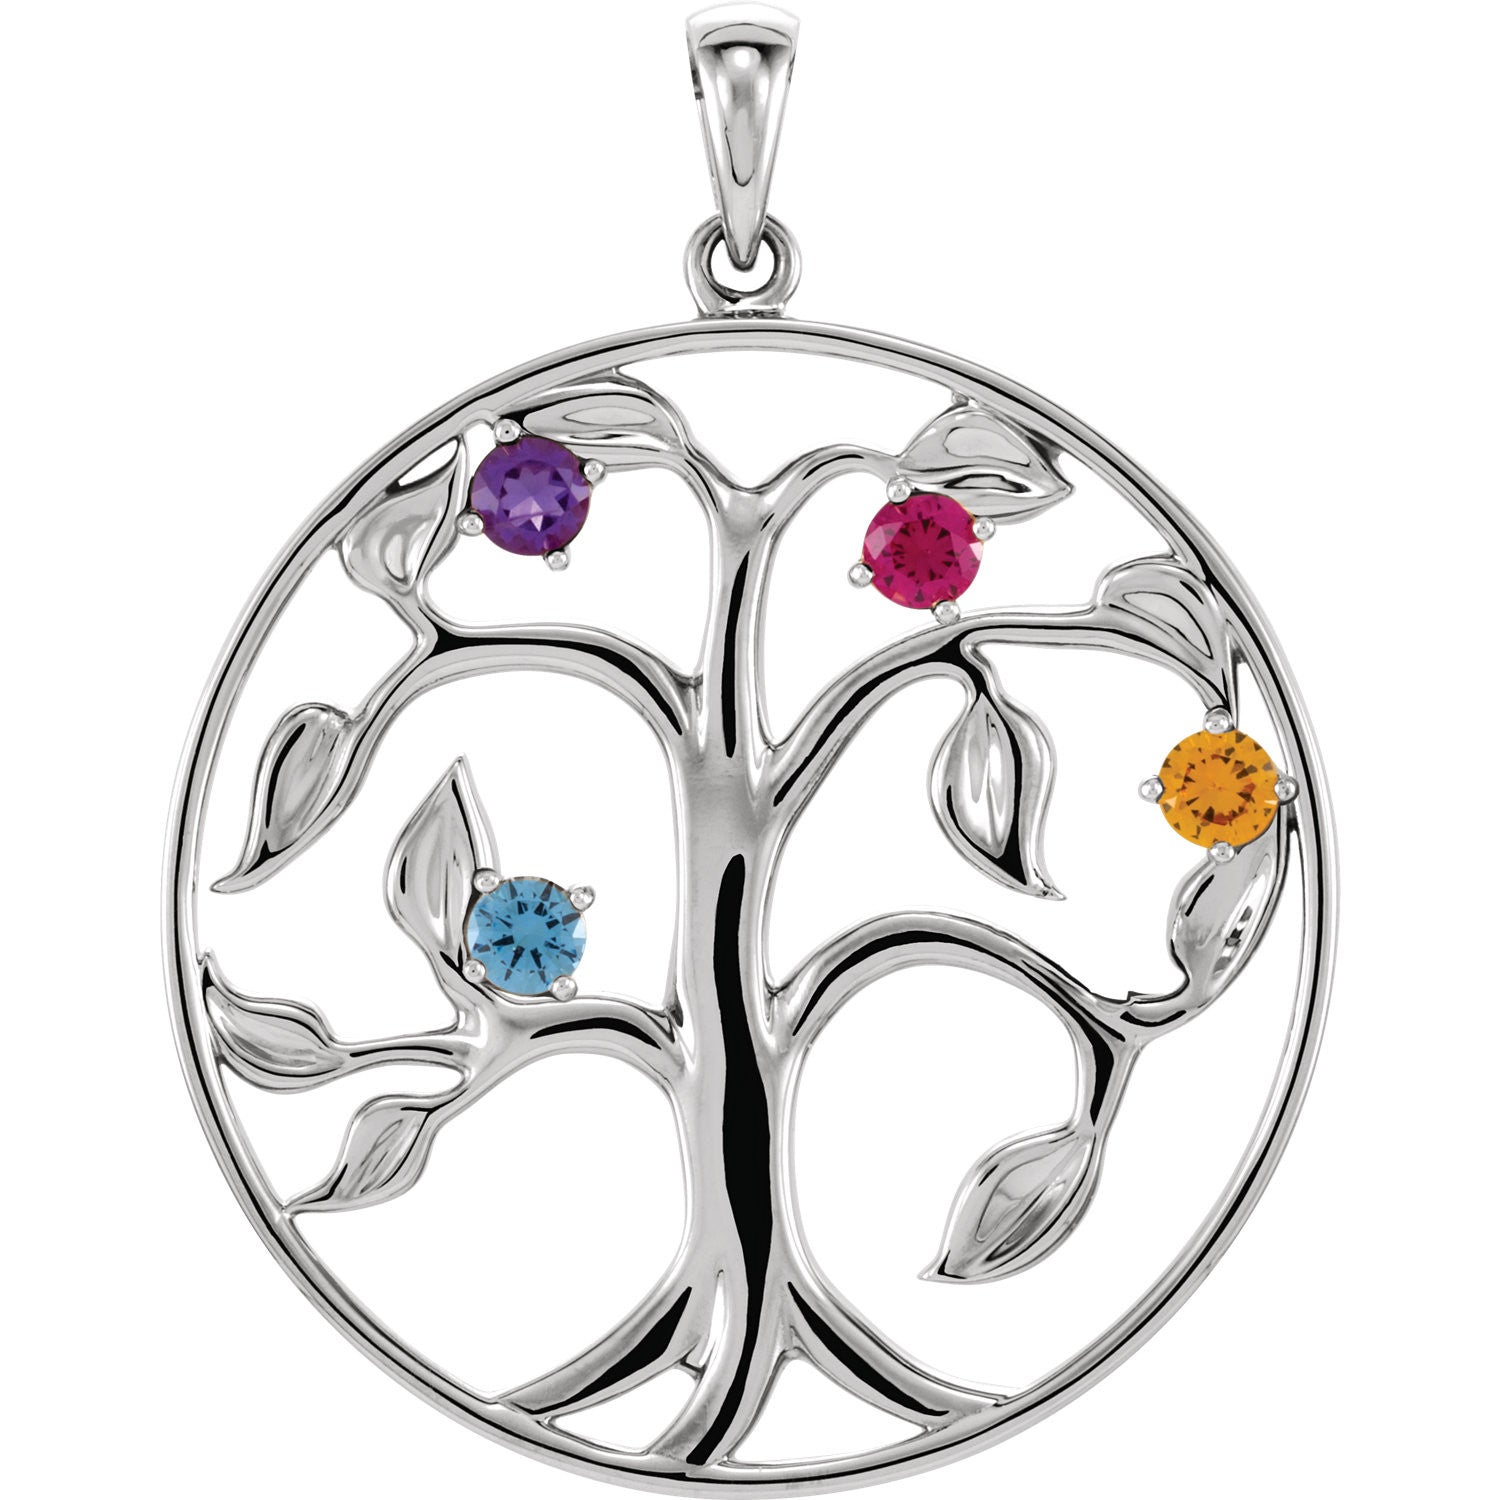 Sterling Silver Tree of Life Pendant or Necklace With Engraved 